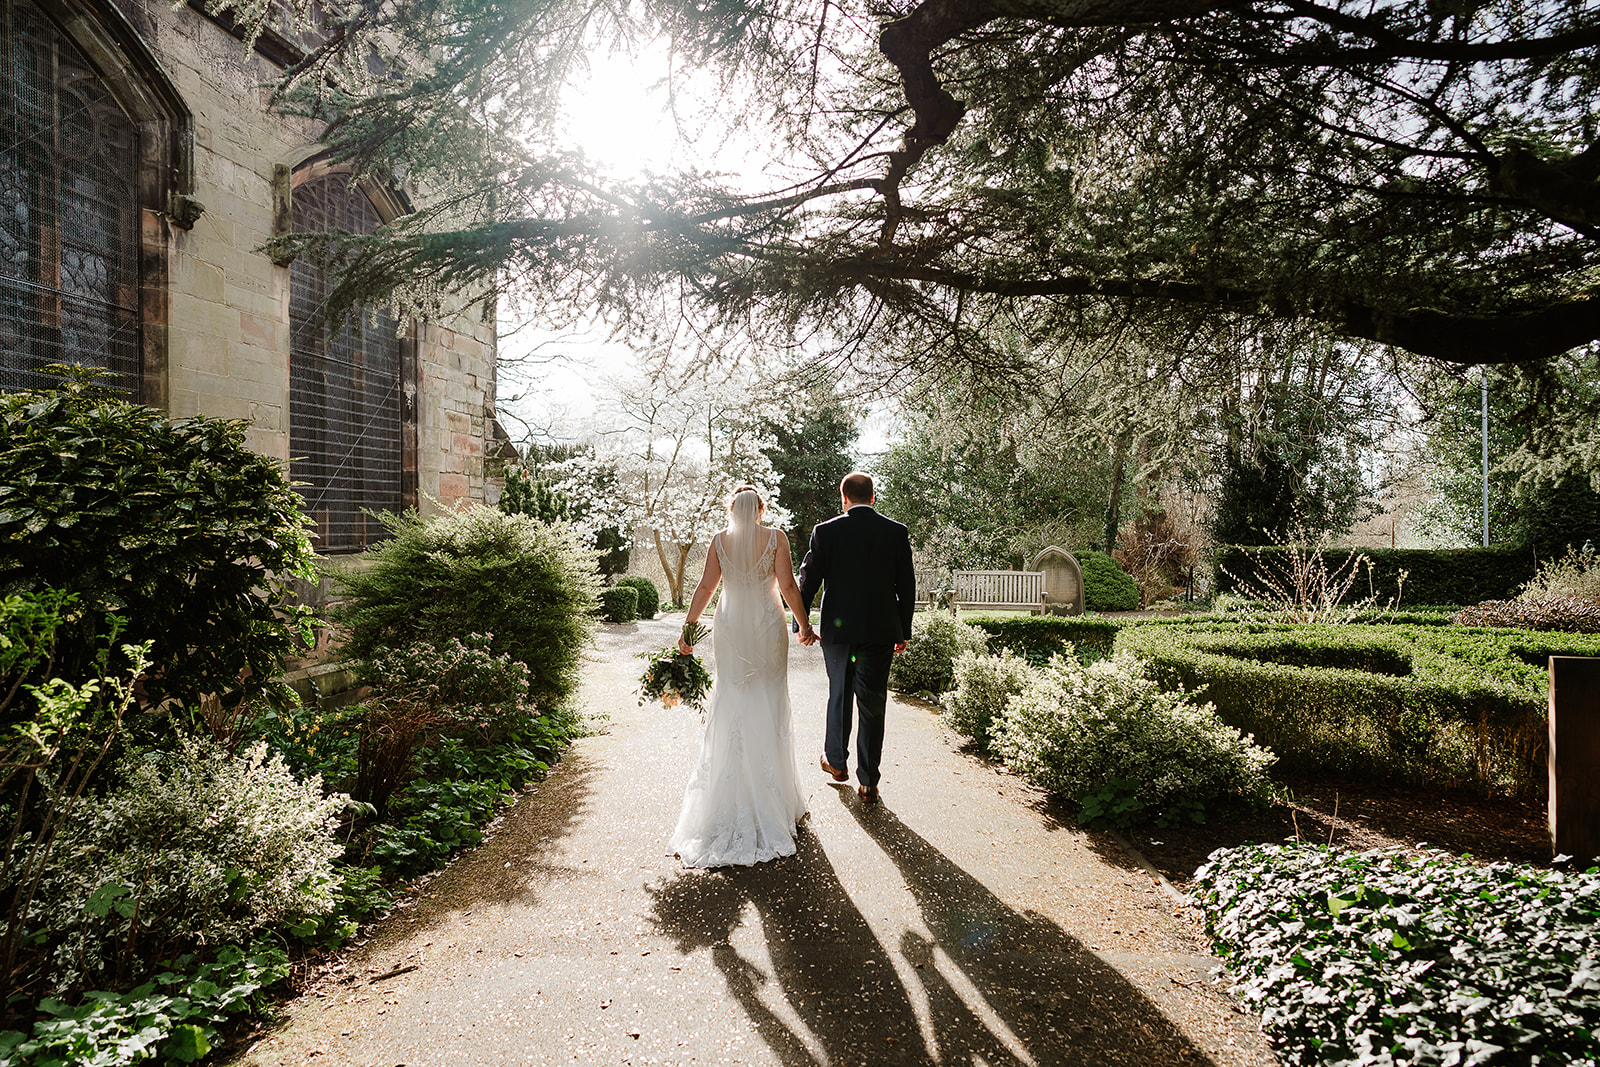 Bride and groom walking under tree with long shadows